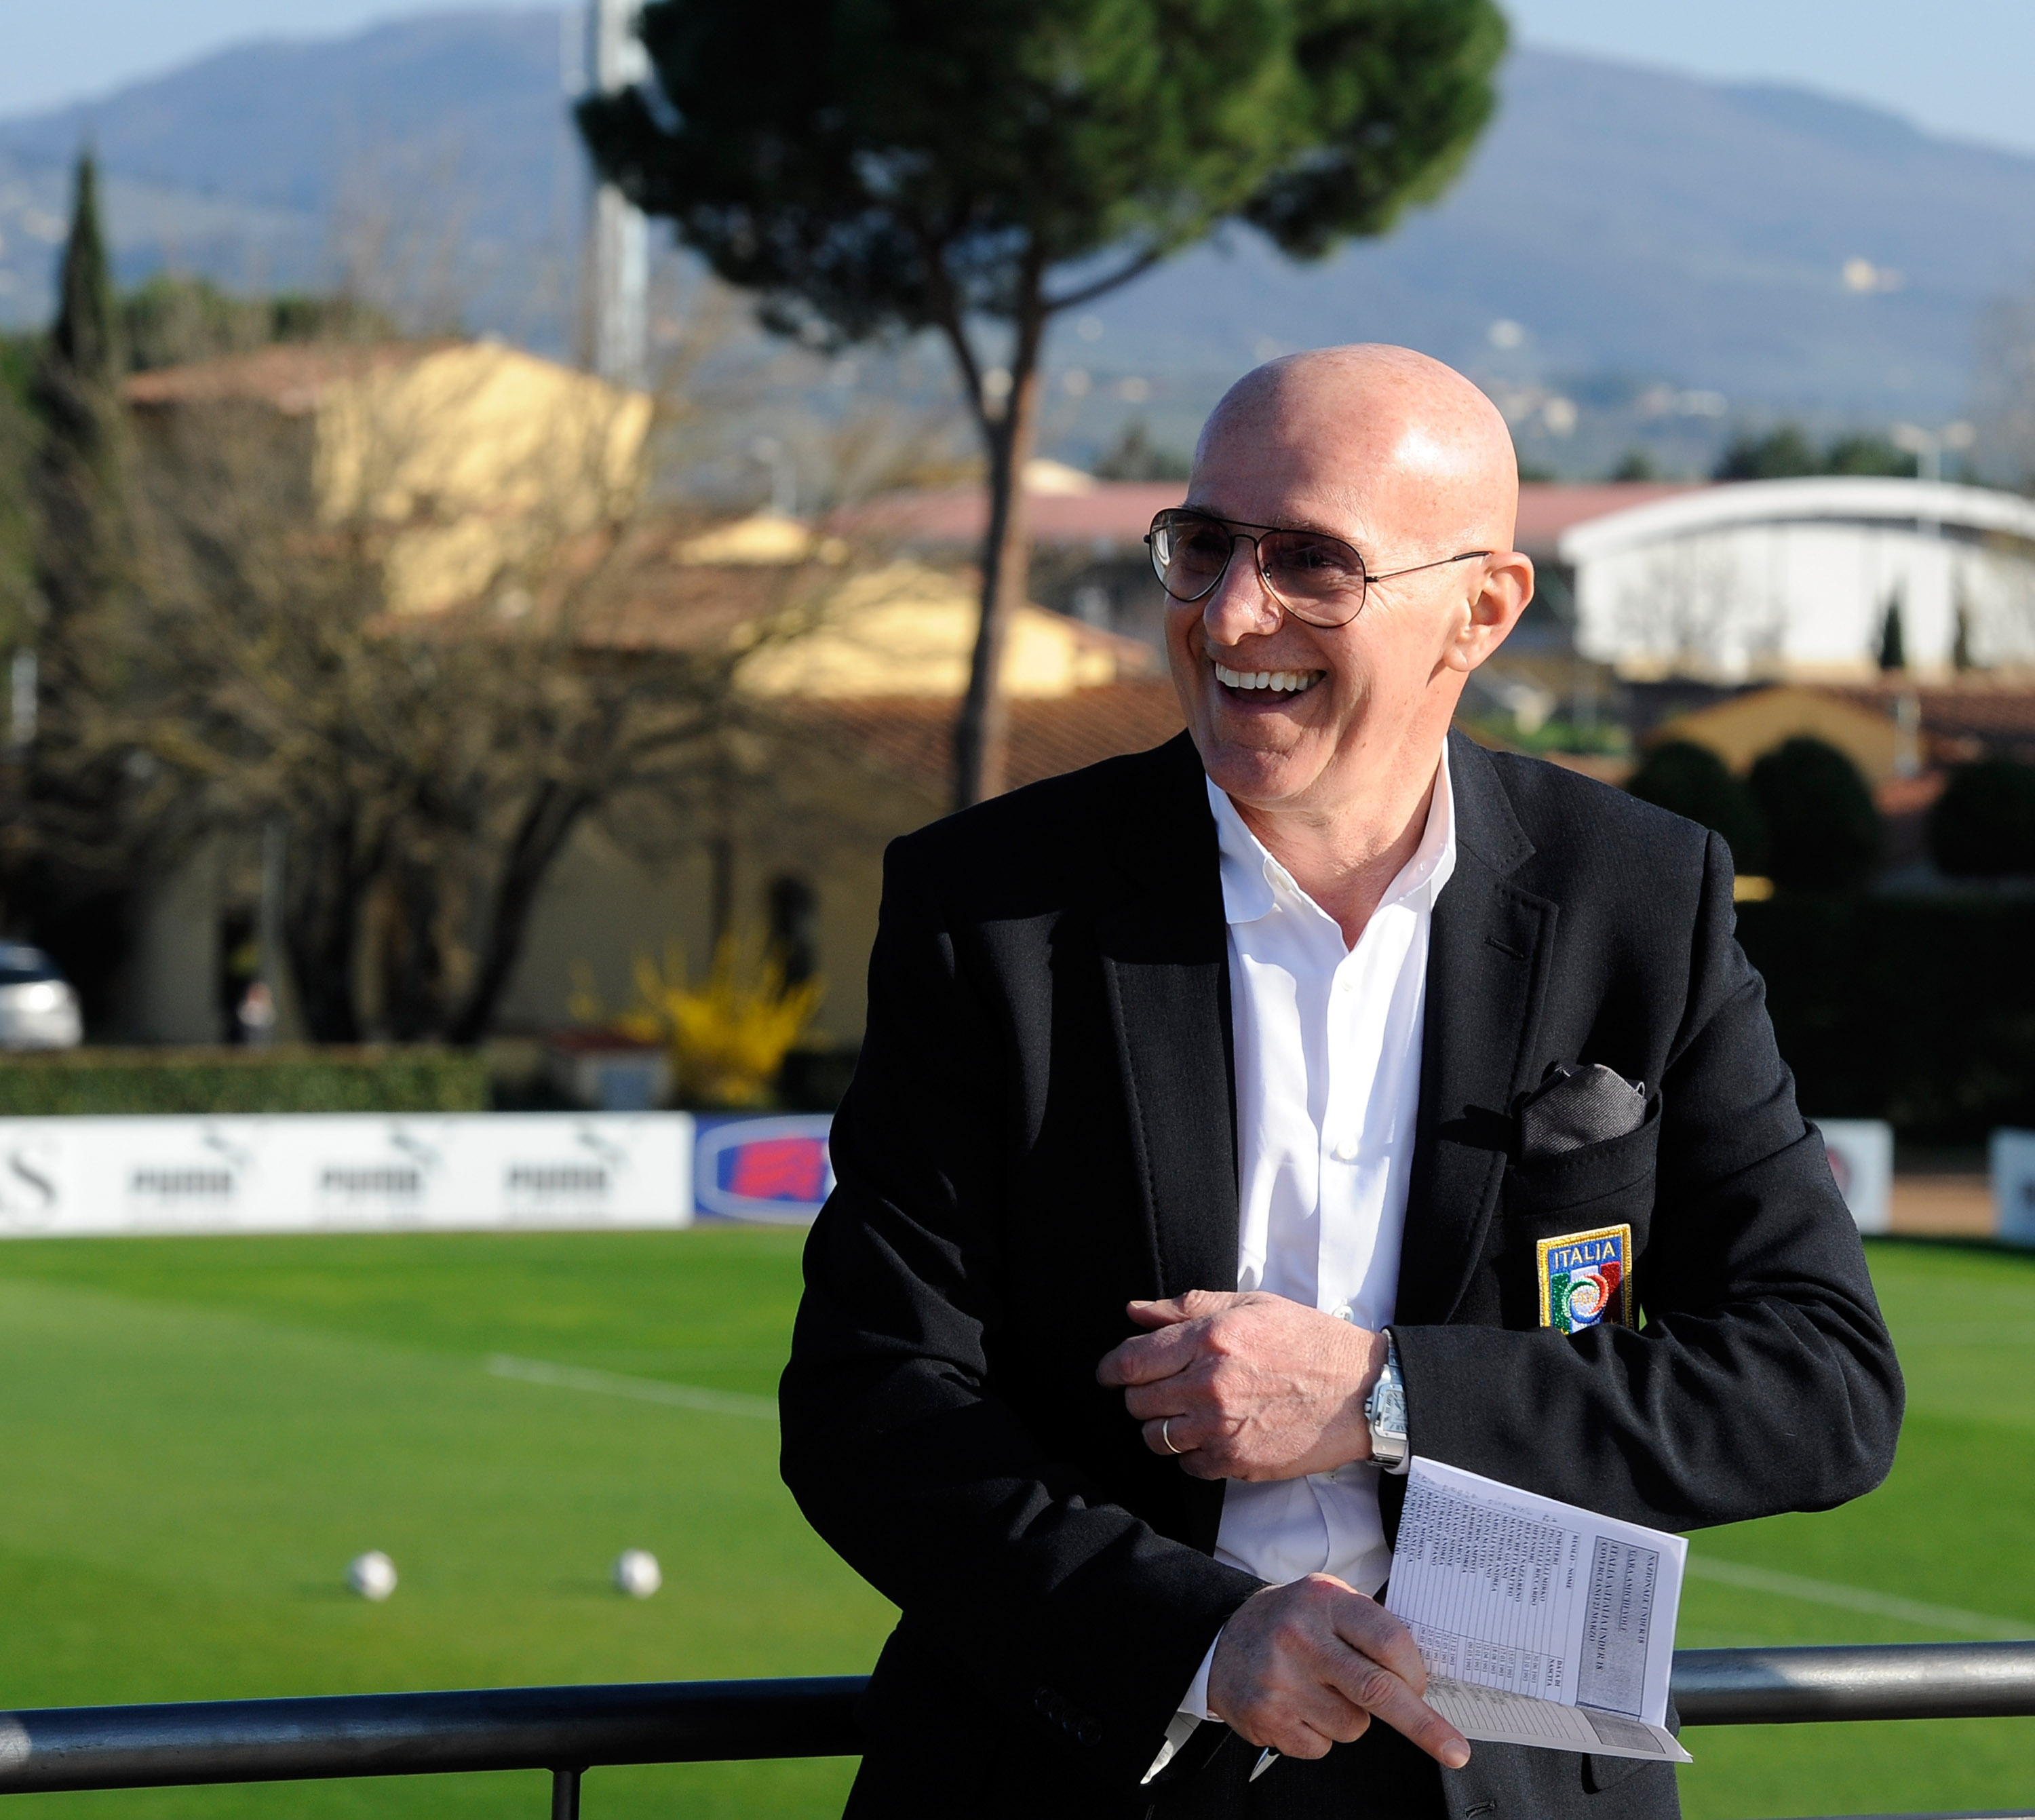 FLORENCE, ITALY - MARCH 23:  Italian Football Youth Coordinator Arrigo Sacchi during a training session ahead of their EURO 2012 qualifier against Slovenia at Coverciano on March 23, 2011 in Florence, Italy.  (Photo by Claudio Villa/Getty Images)